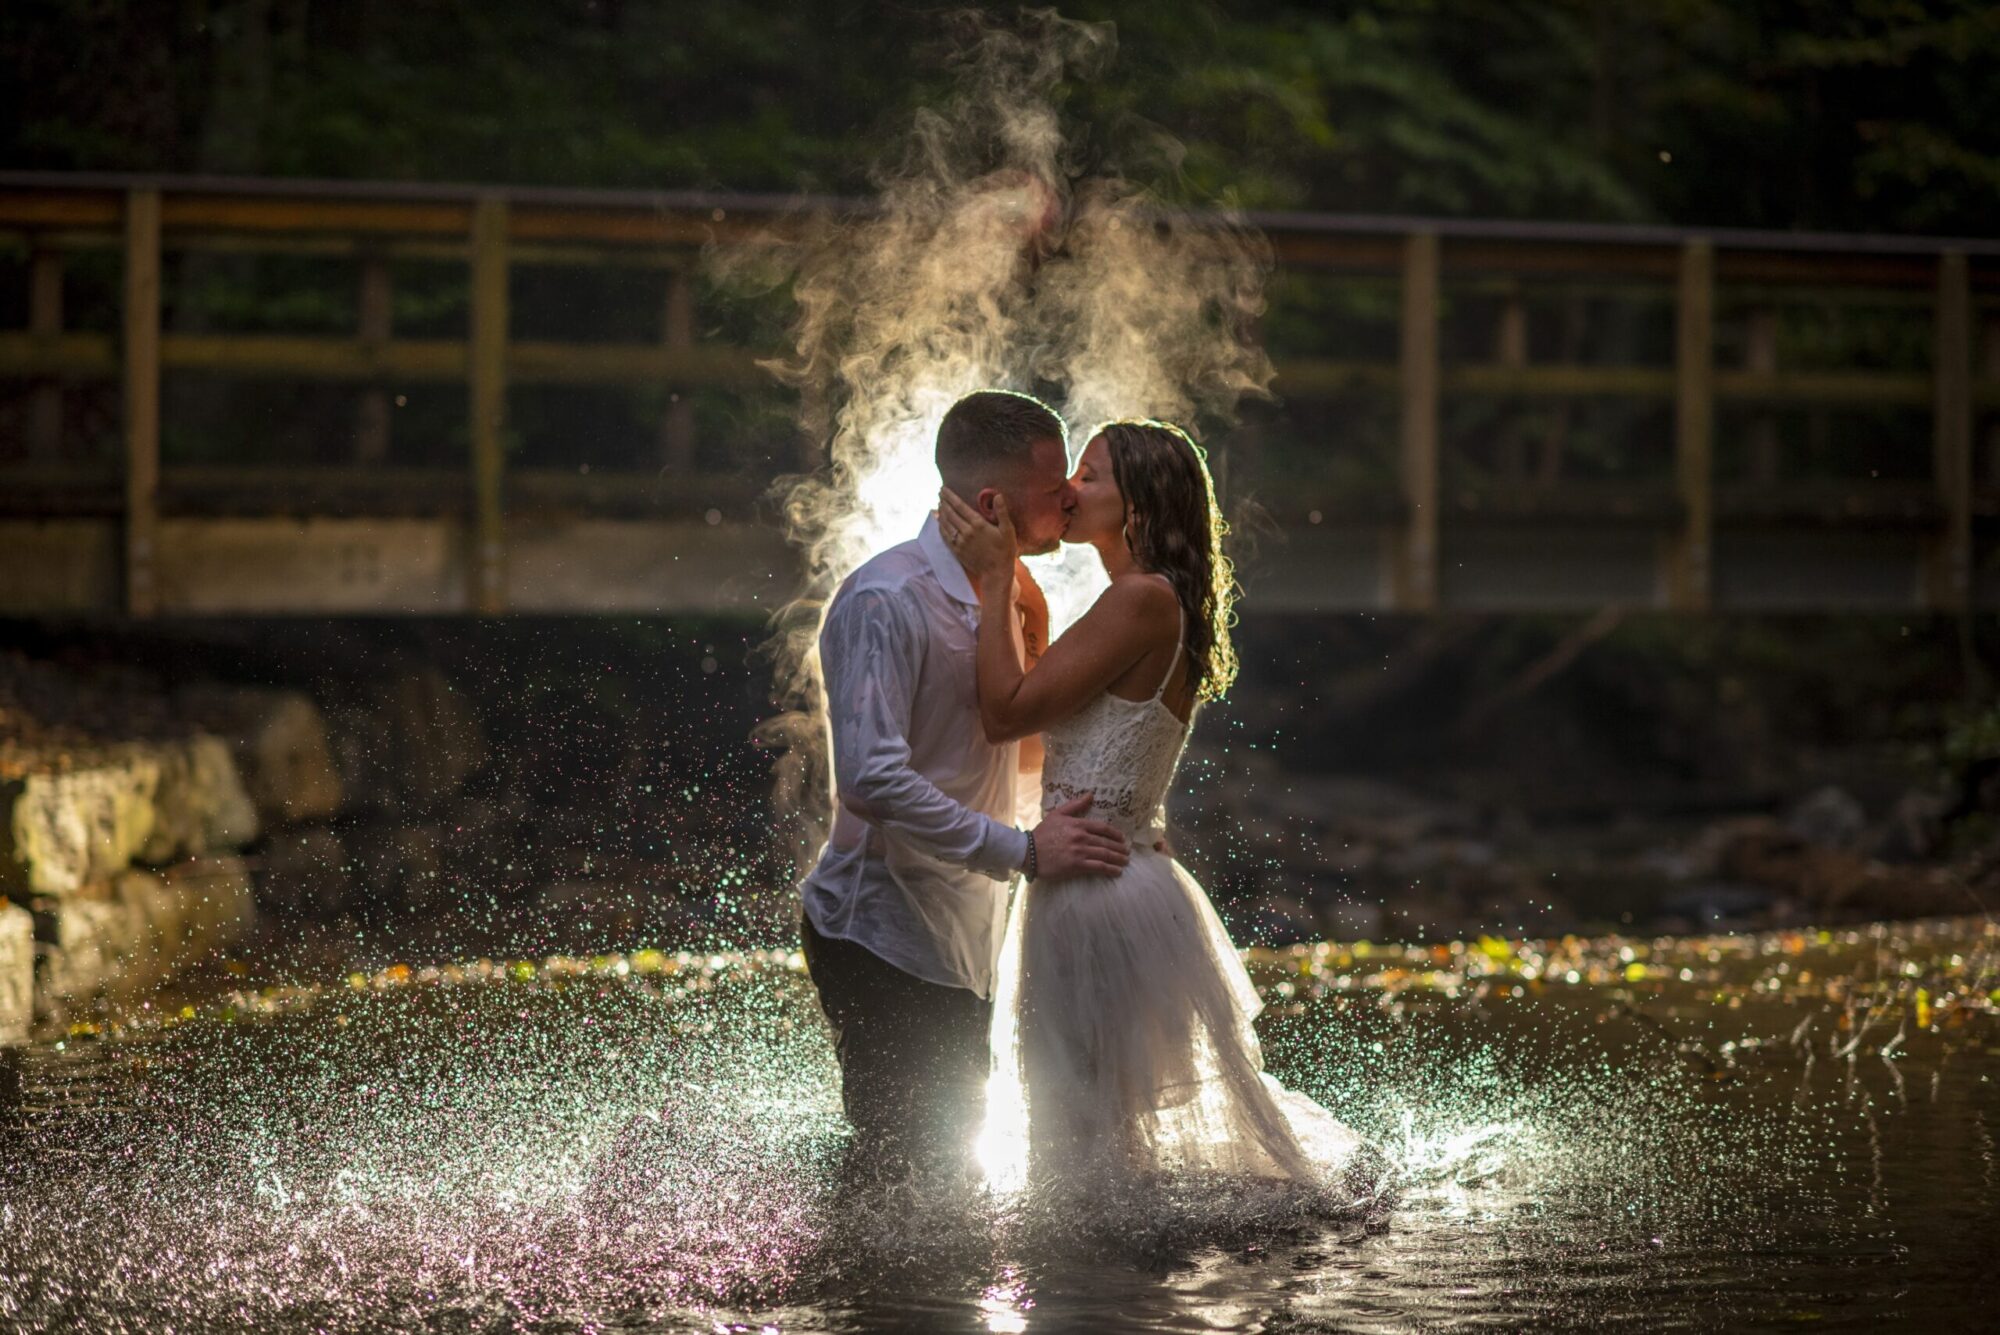 An intimate steamy kiss with an engaged couple in a pool of water. Steam rising from their bodies. Family and wedding photography in Pittsburgh.